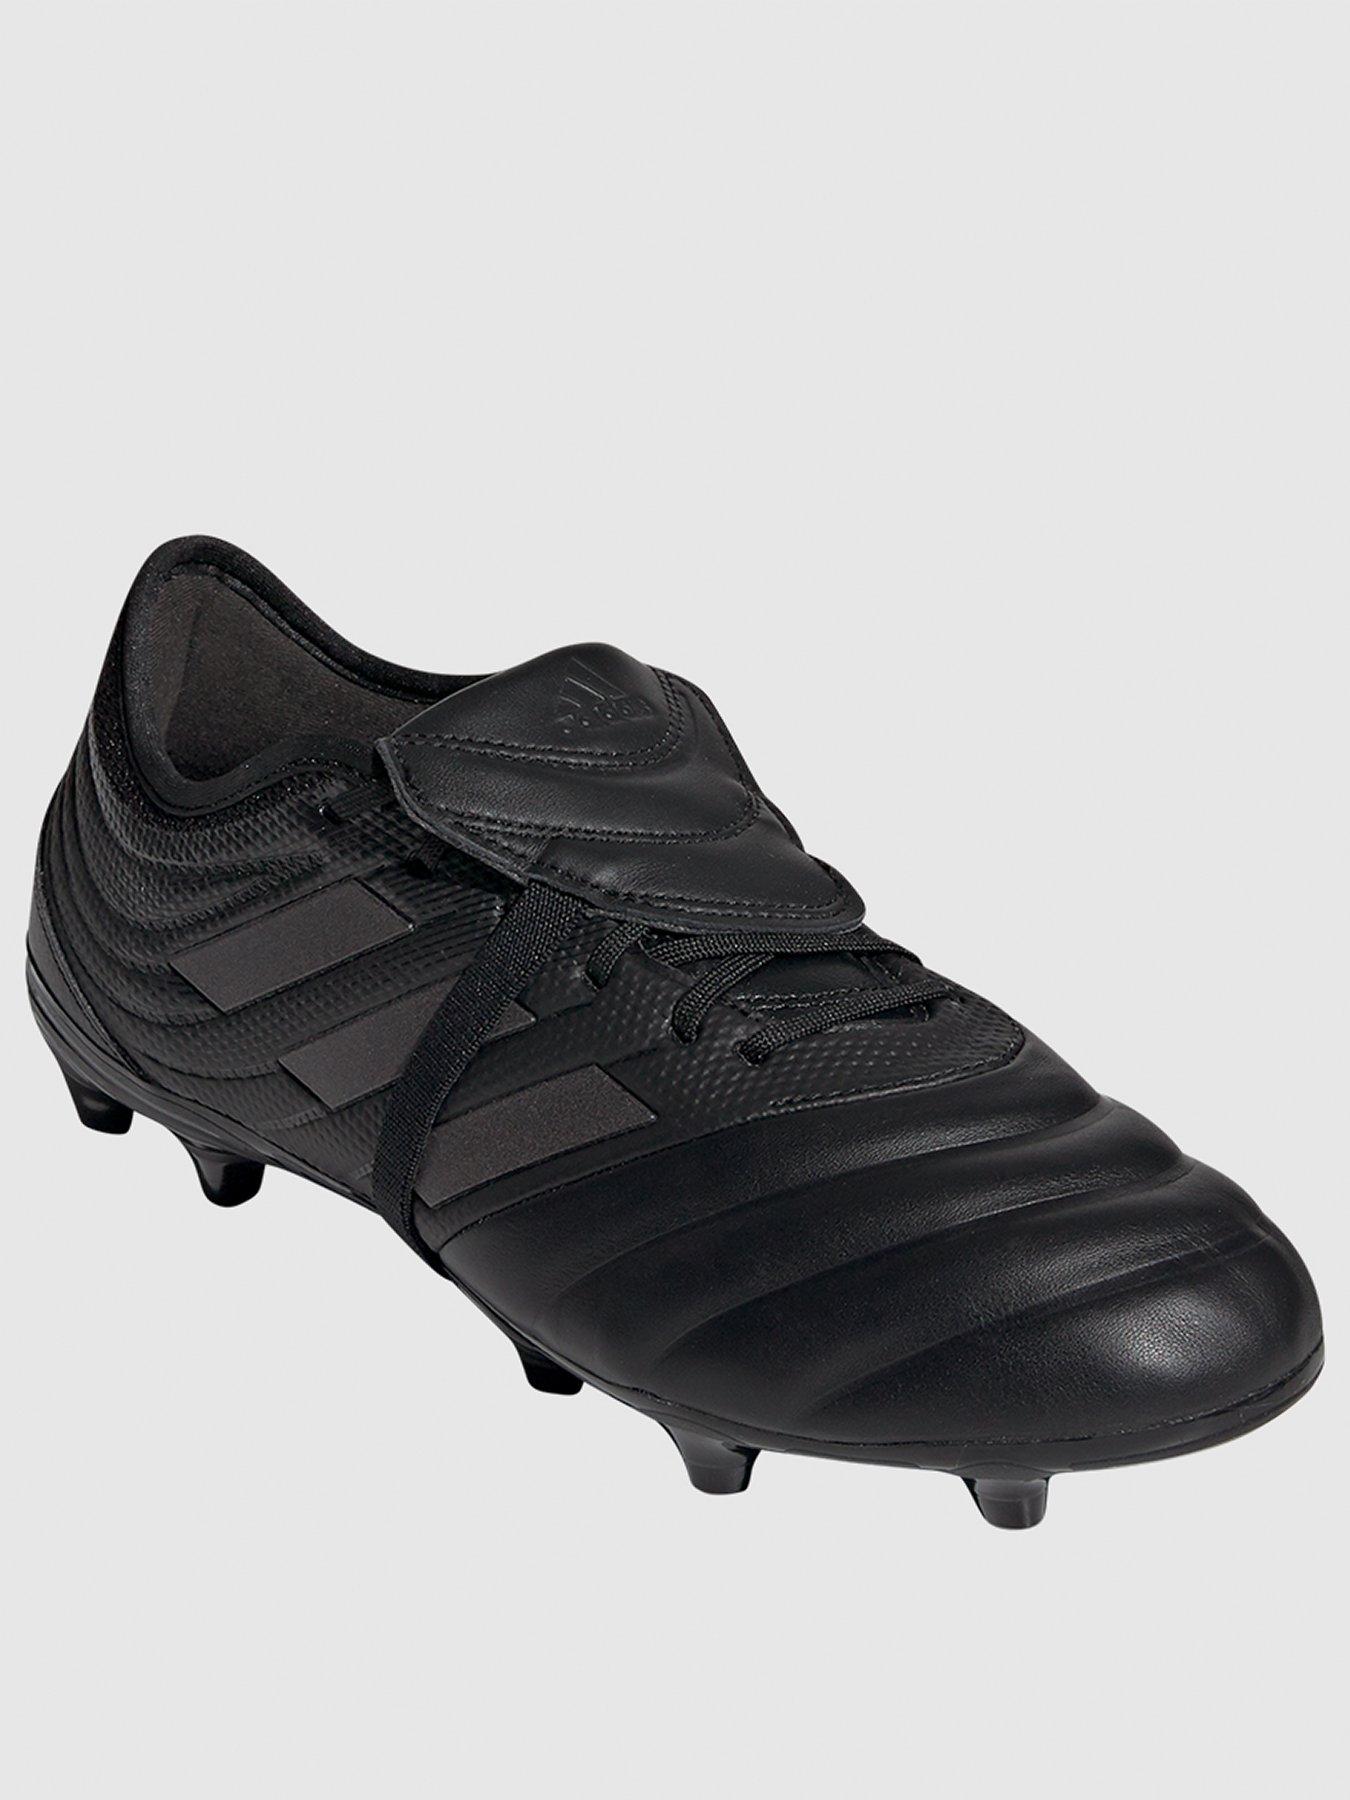 Adidas Copa 19 2 Firm Ground Football Boot Black Very Co Uk